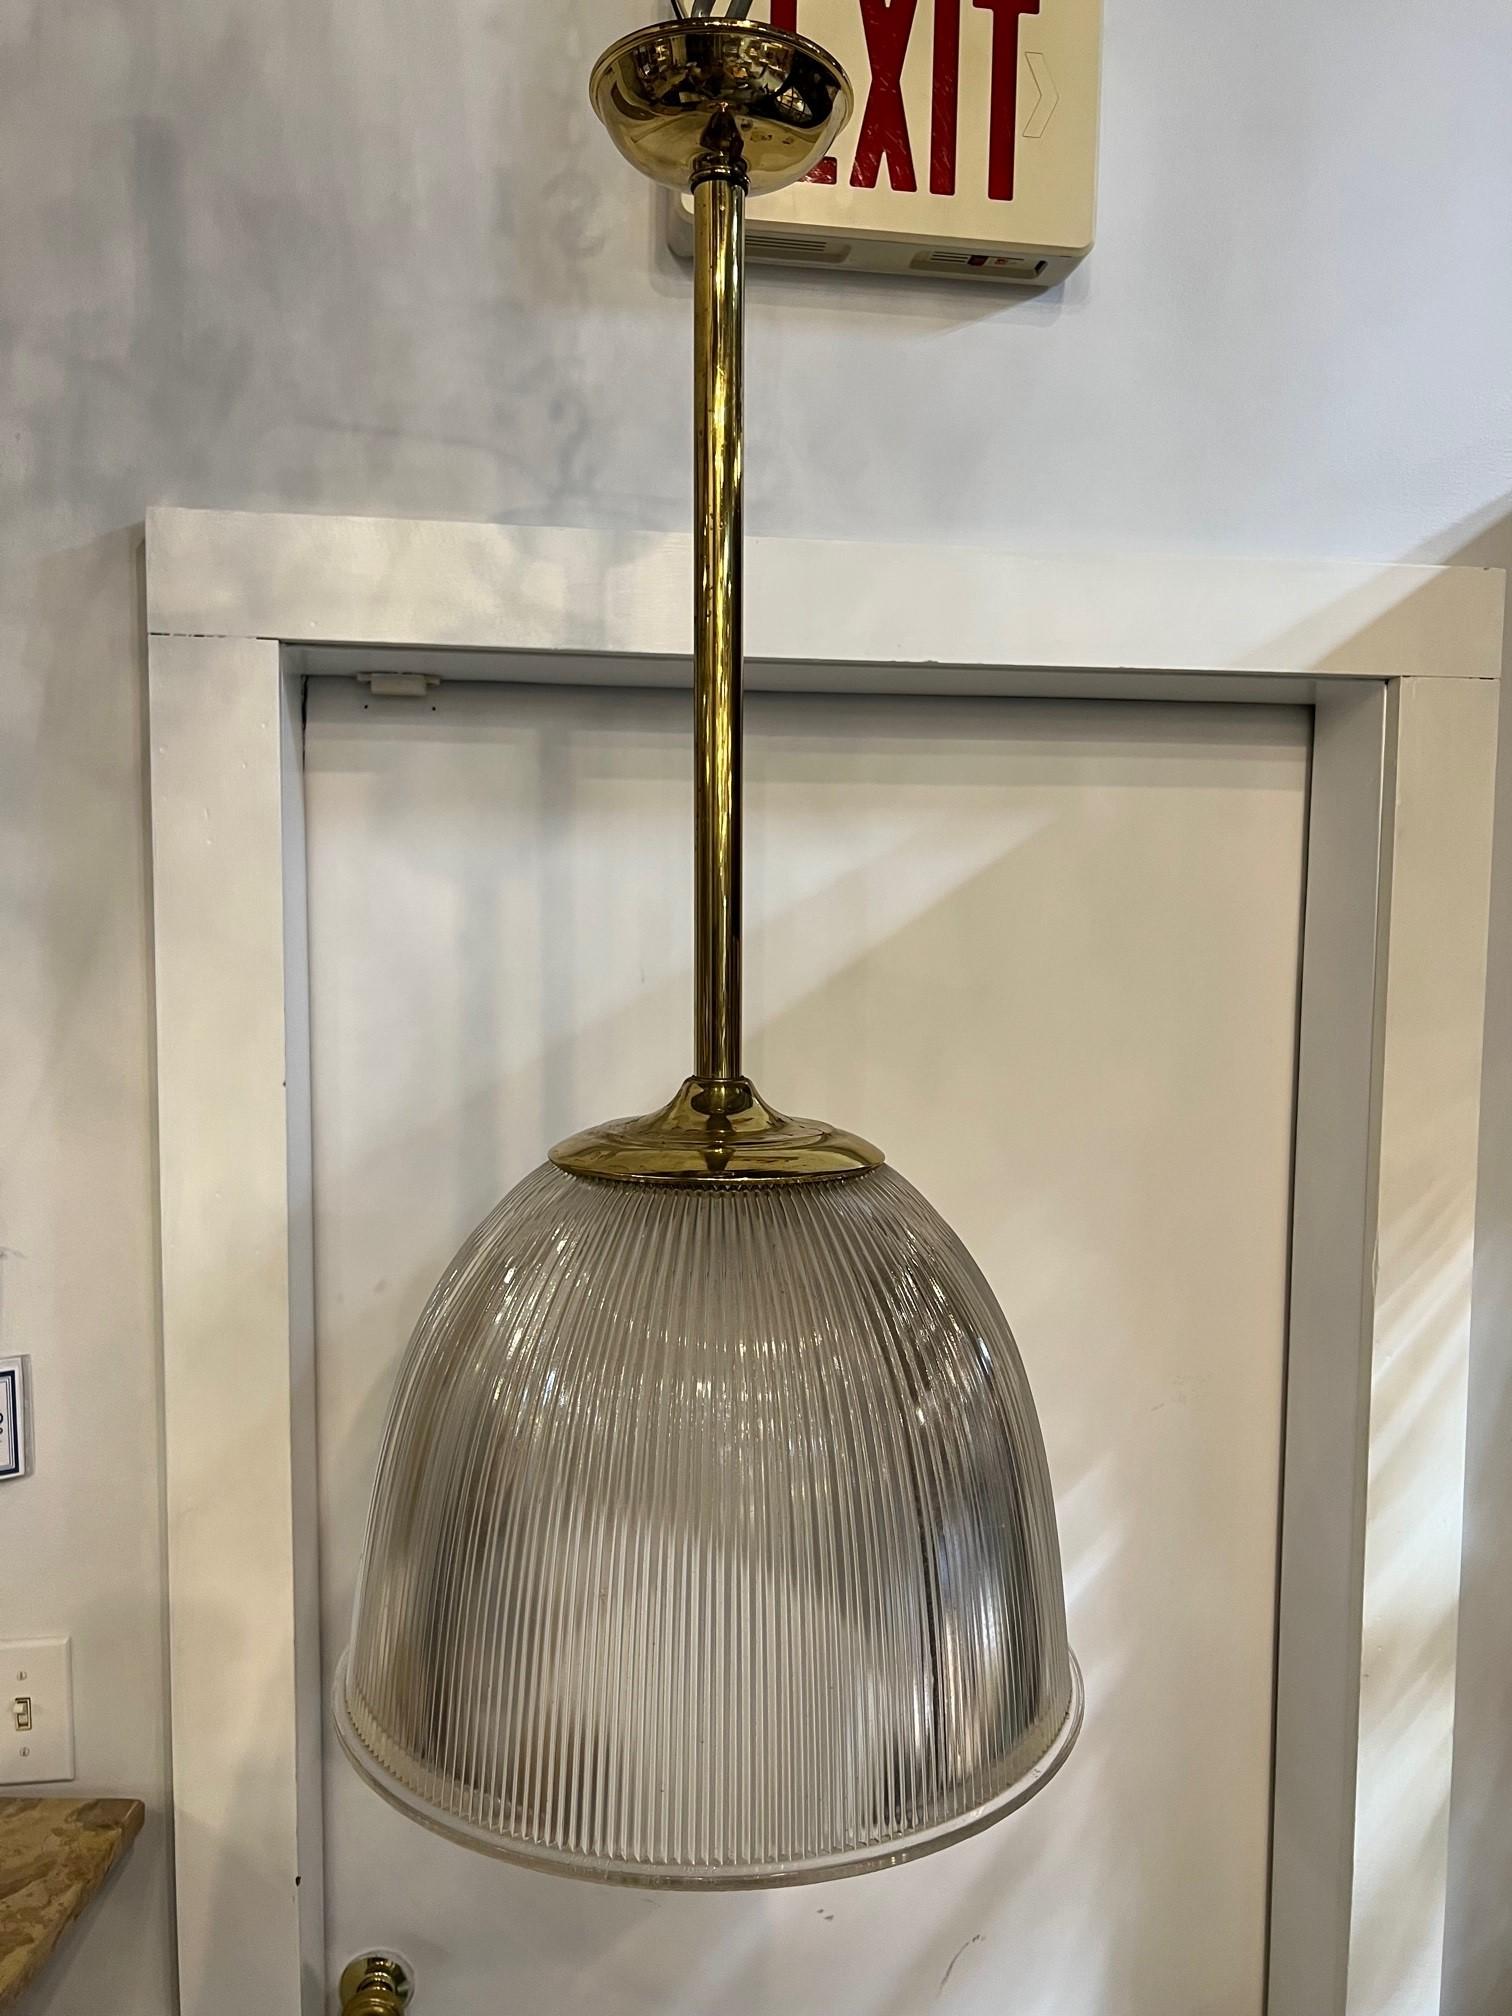 Seven Mid-20th Century Holophane Pyrex Glass Globe Pendant Light with Brass Pole For Sale 5